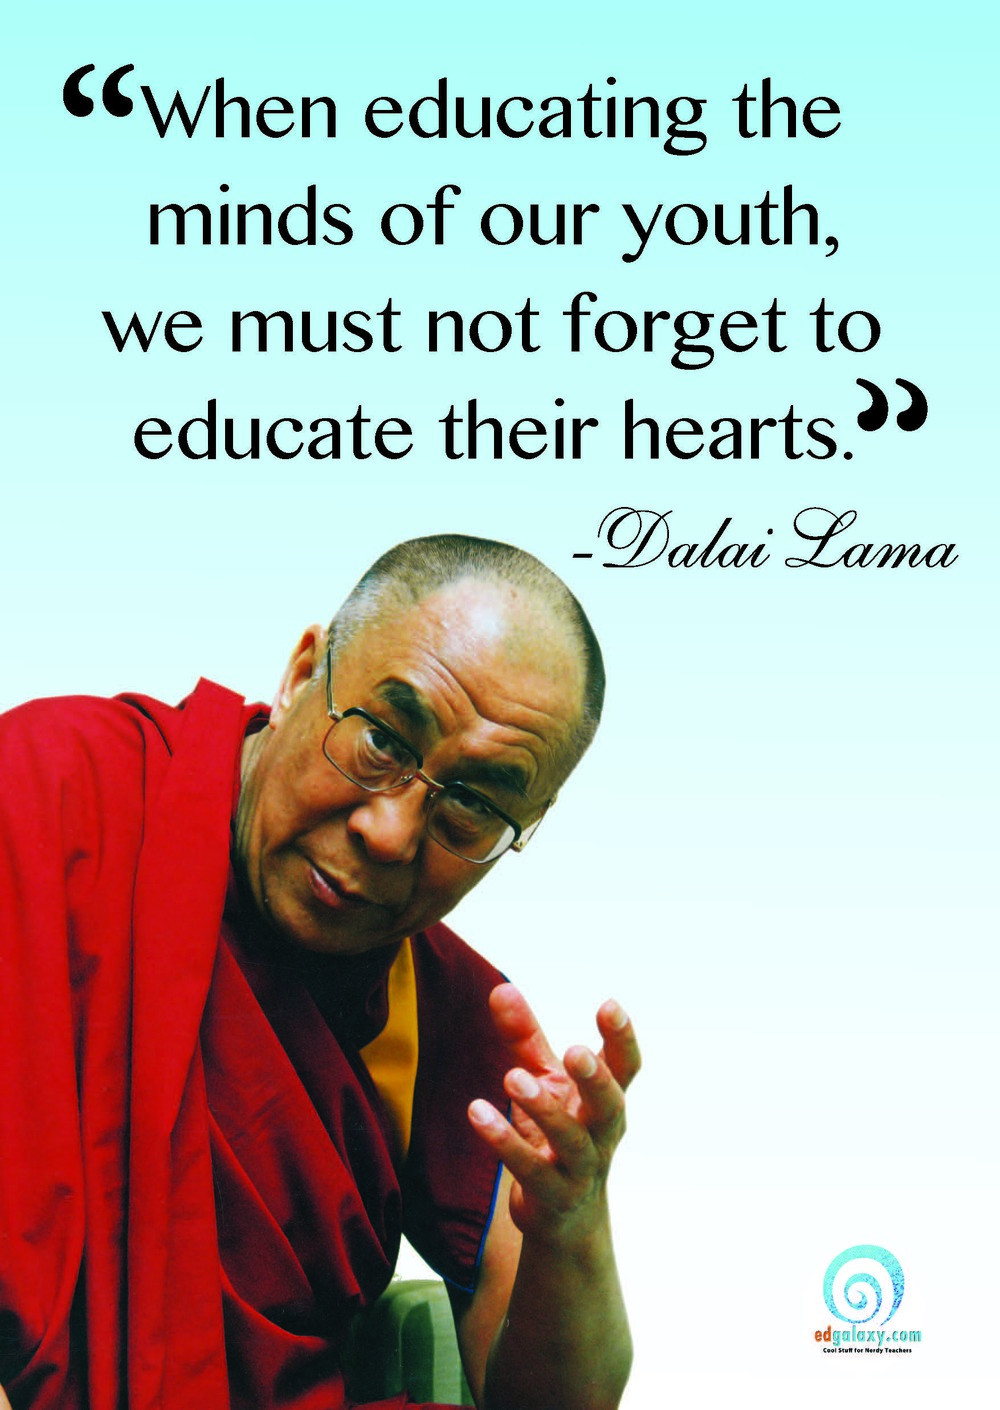 Educational Quotes For Teachers
 Education Quotes Famous Quotes for teachers and Students